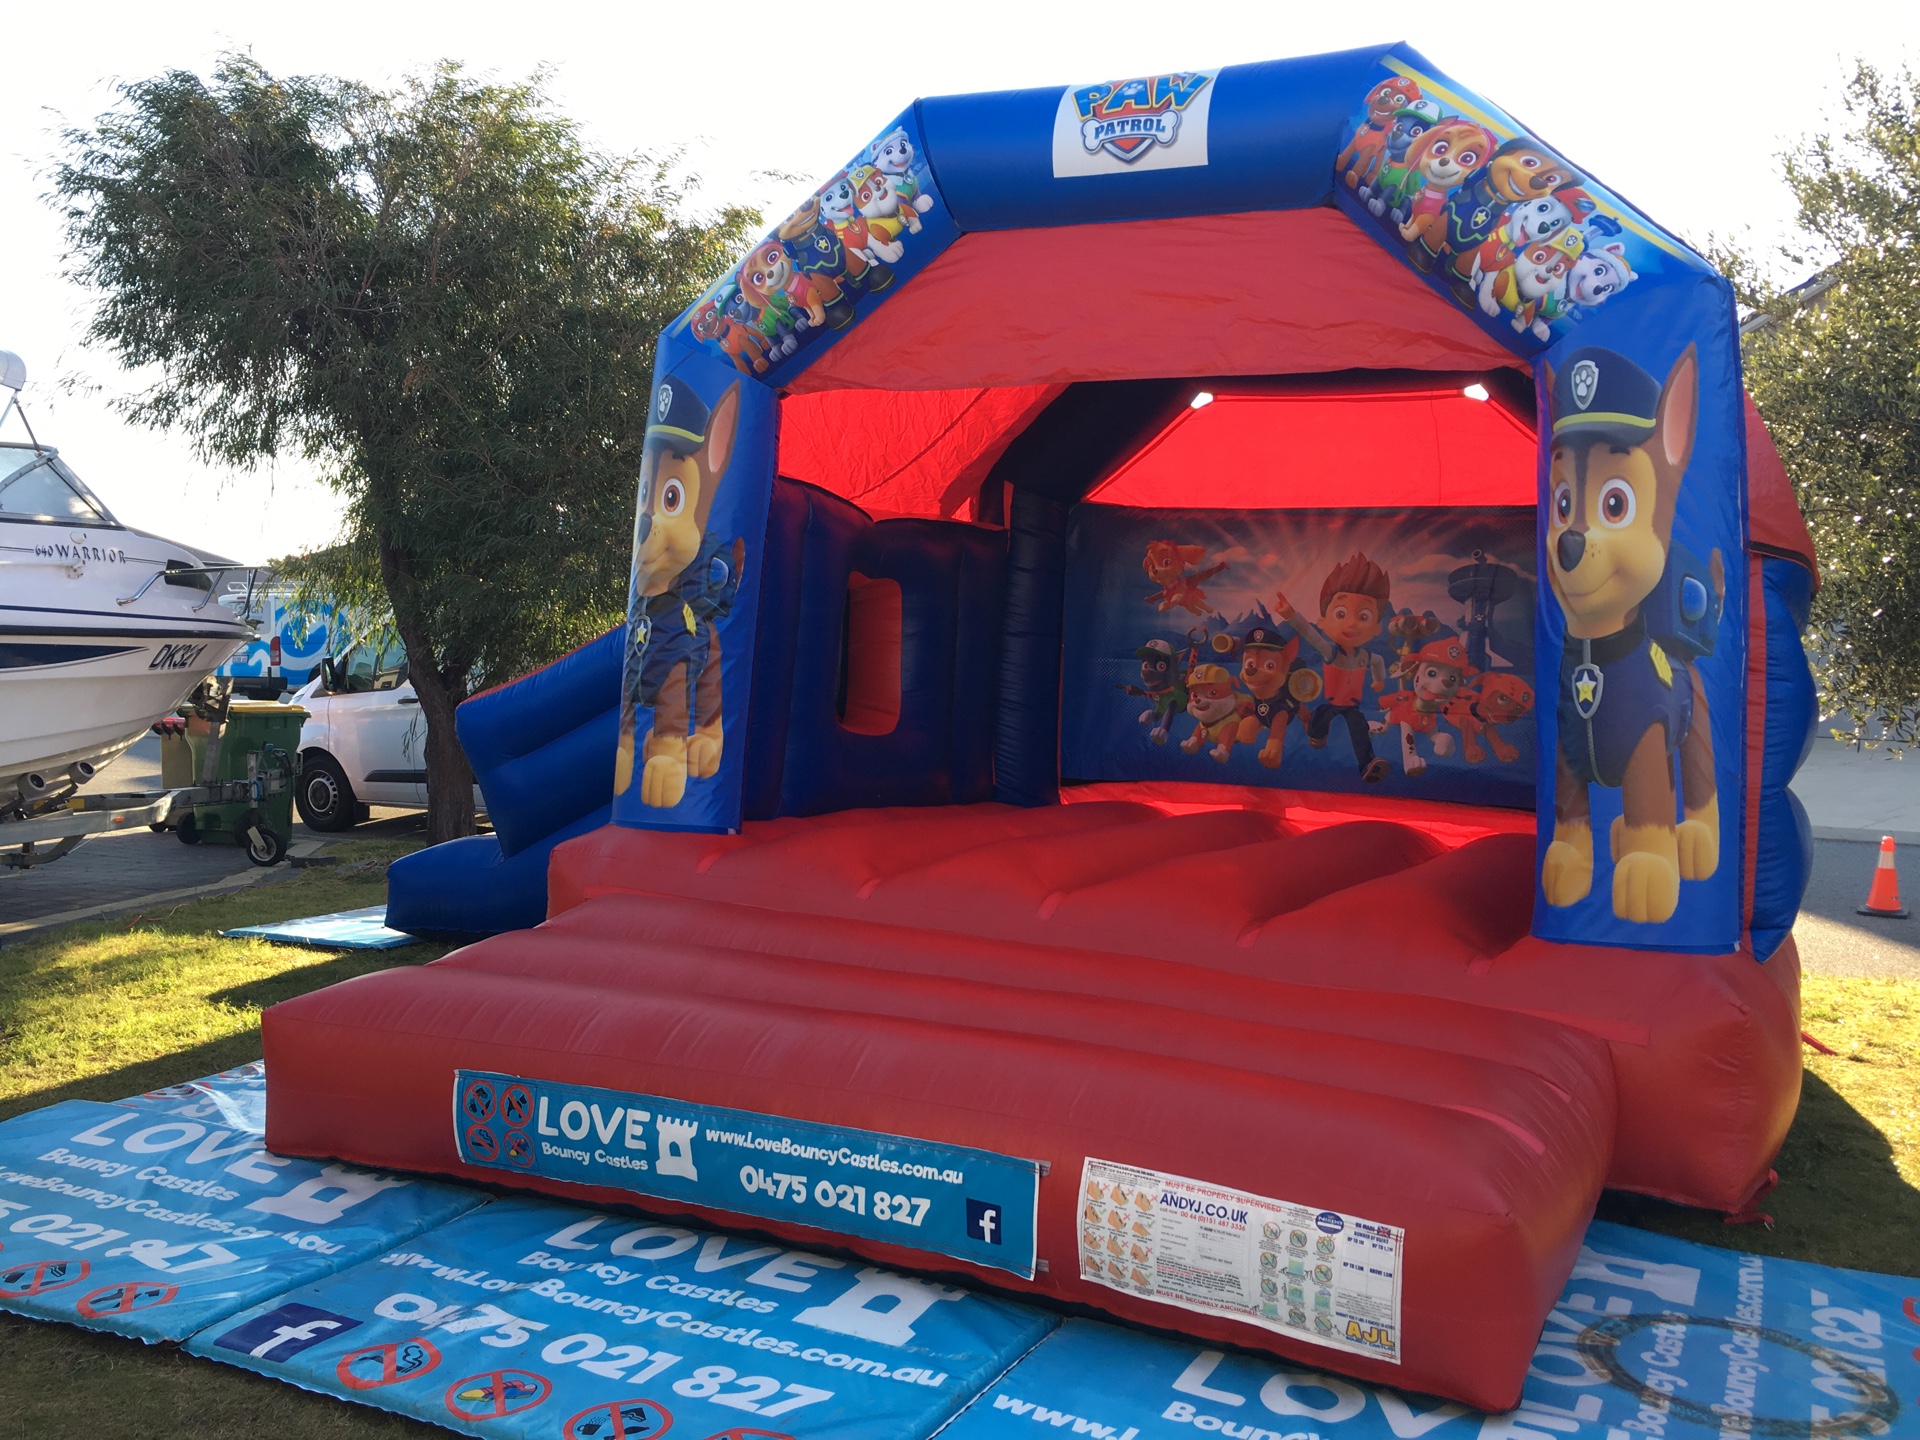 Copy of Paw Patrol Combo Jumping Castle Hire Perth, WA